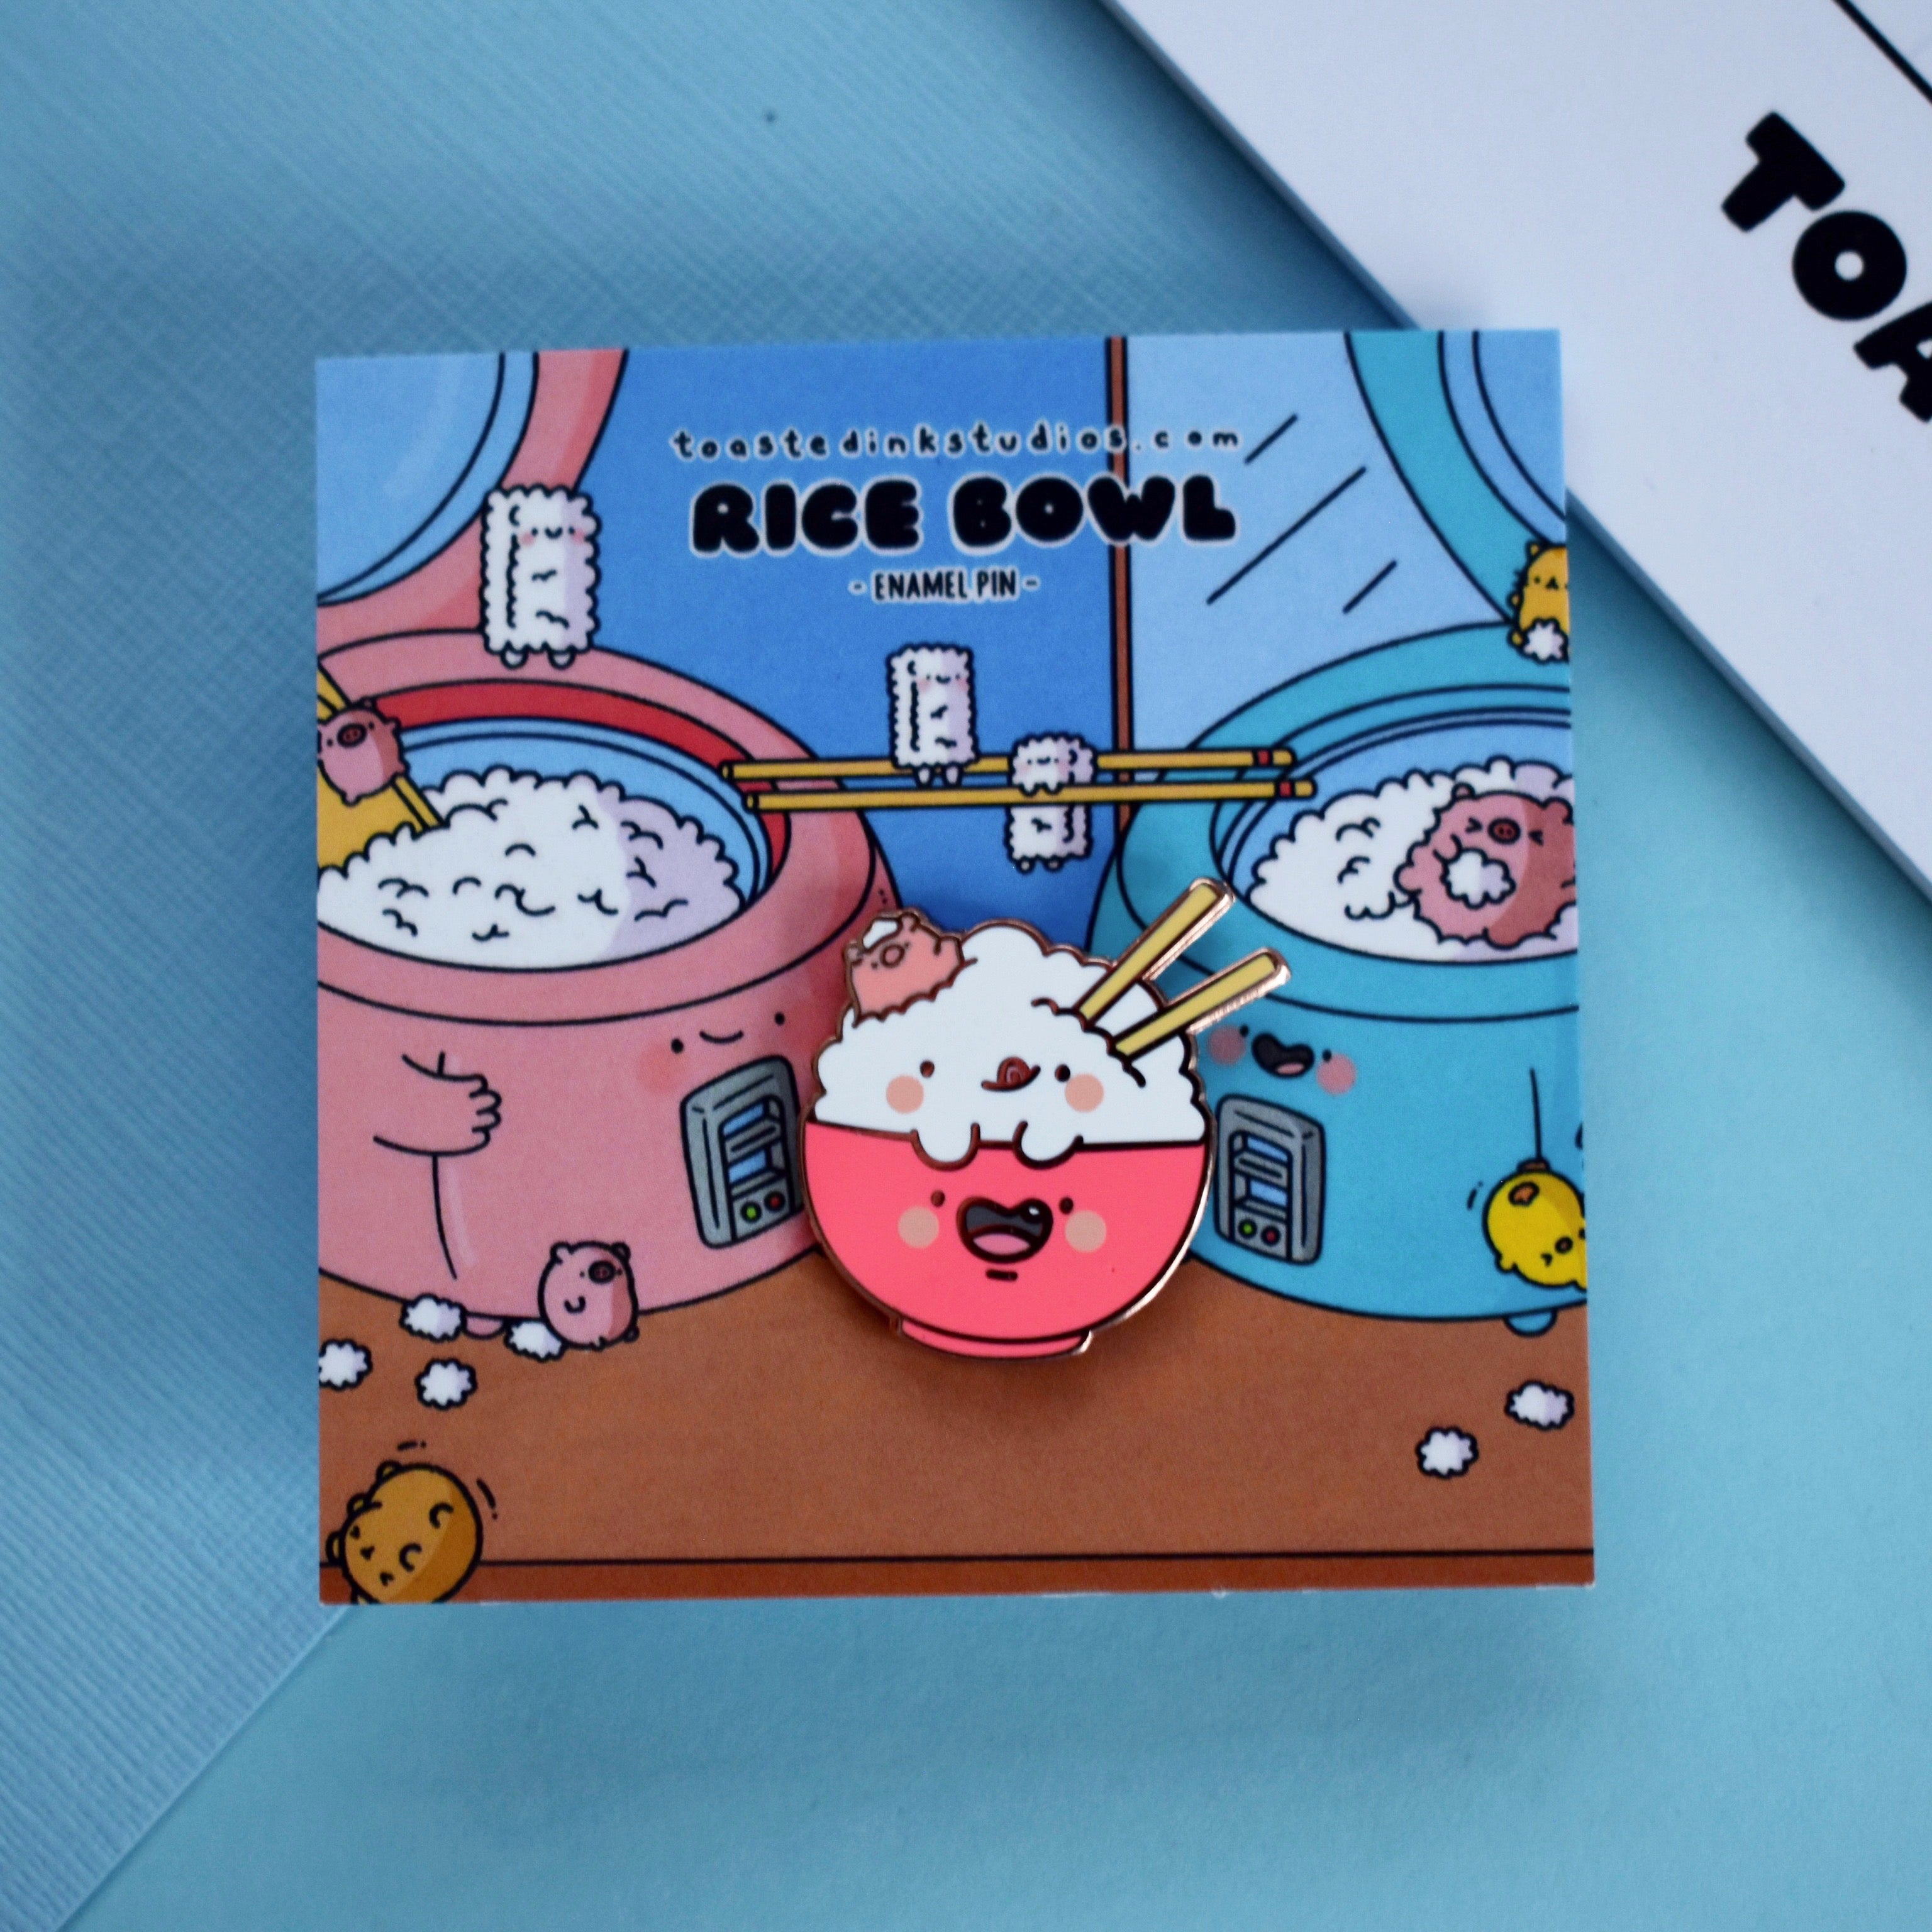 Rice bowl pin backing card with 2 rice cookers